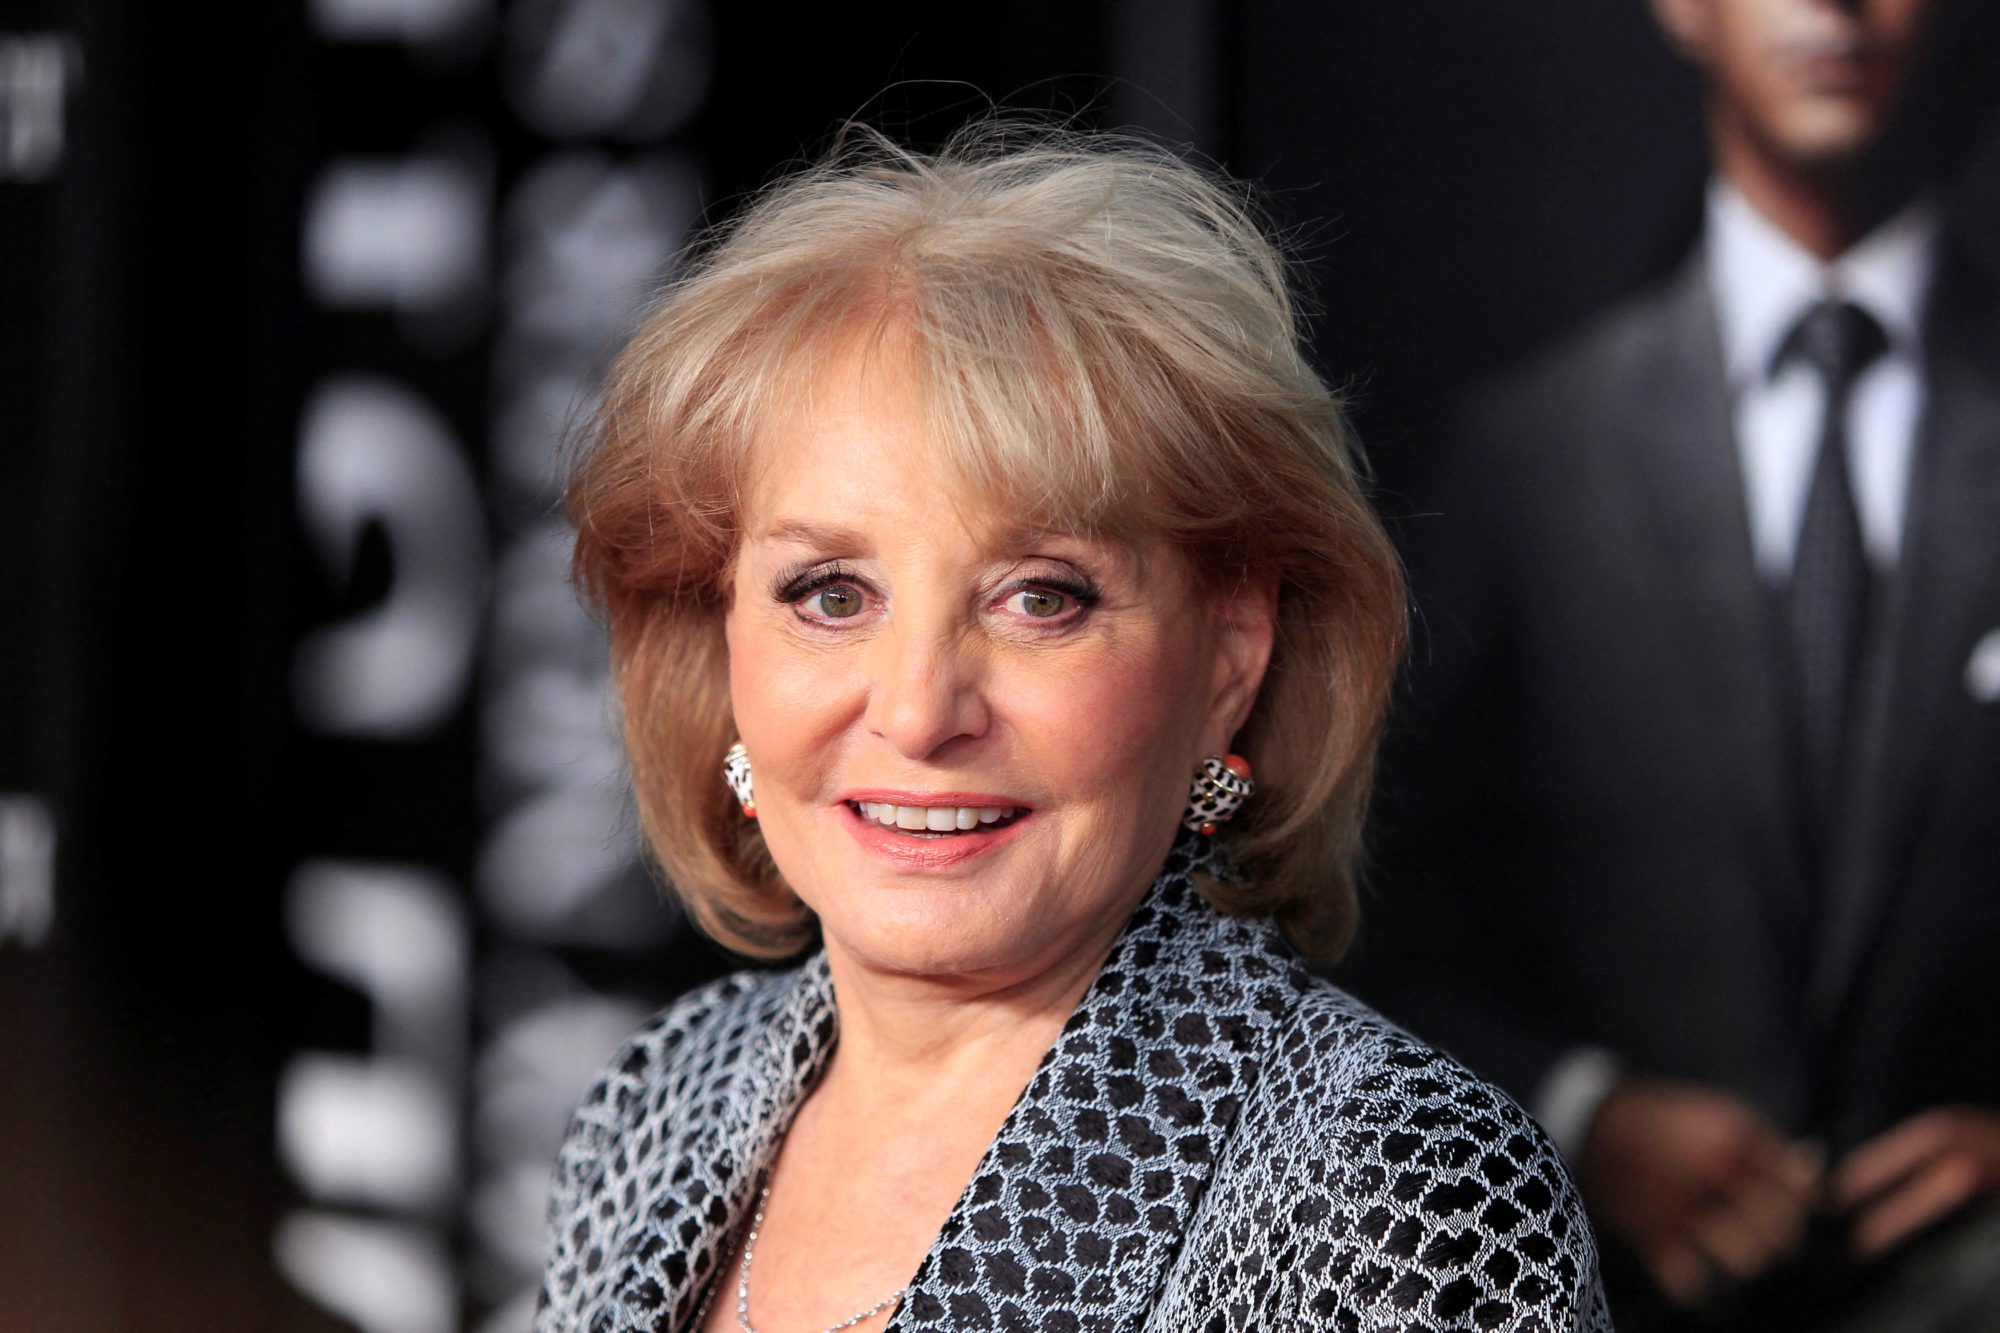 FILE PHOTO: Television personality Barbara Walters arrives for the premiere of the film "Wall Street: Money Never Sleeps" in New York September 20, 2010. REUTERS/Lucas Jackson/File Photo